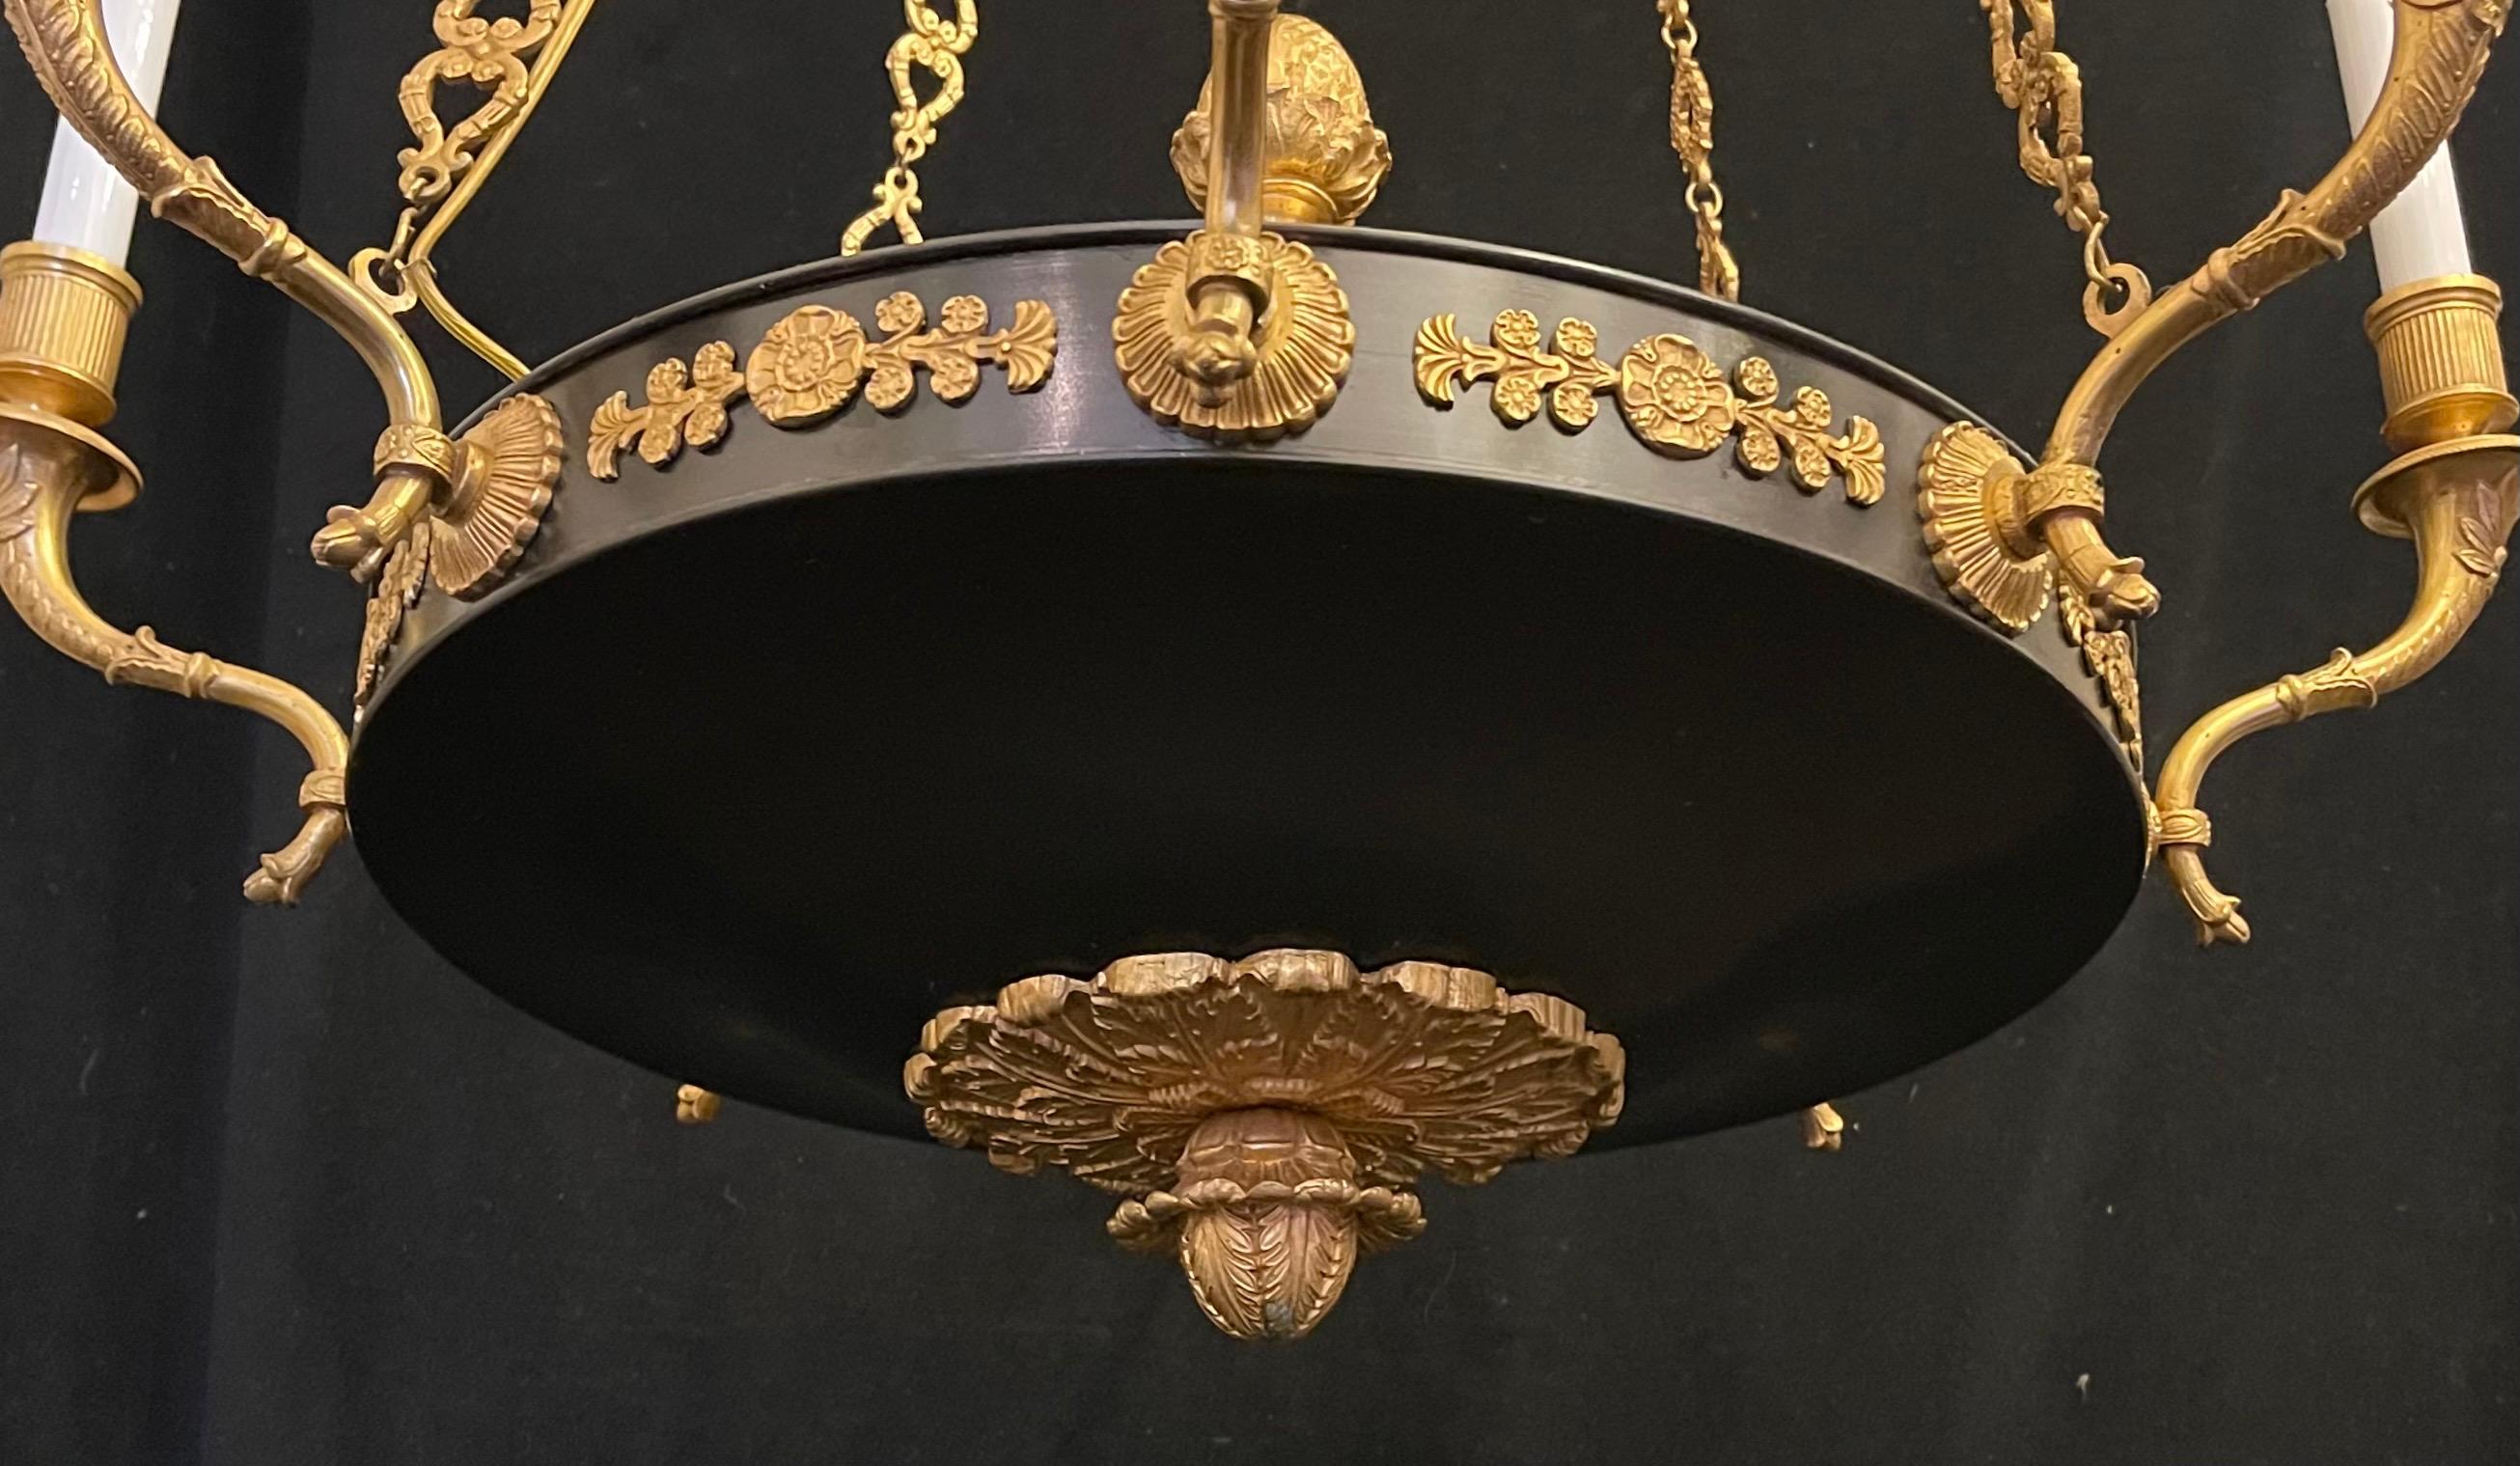 20th Century Wonderful French Empire Neoclassical Patinated Ormolu Bronze Chandelier Fixture For Sale